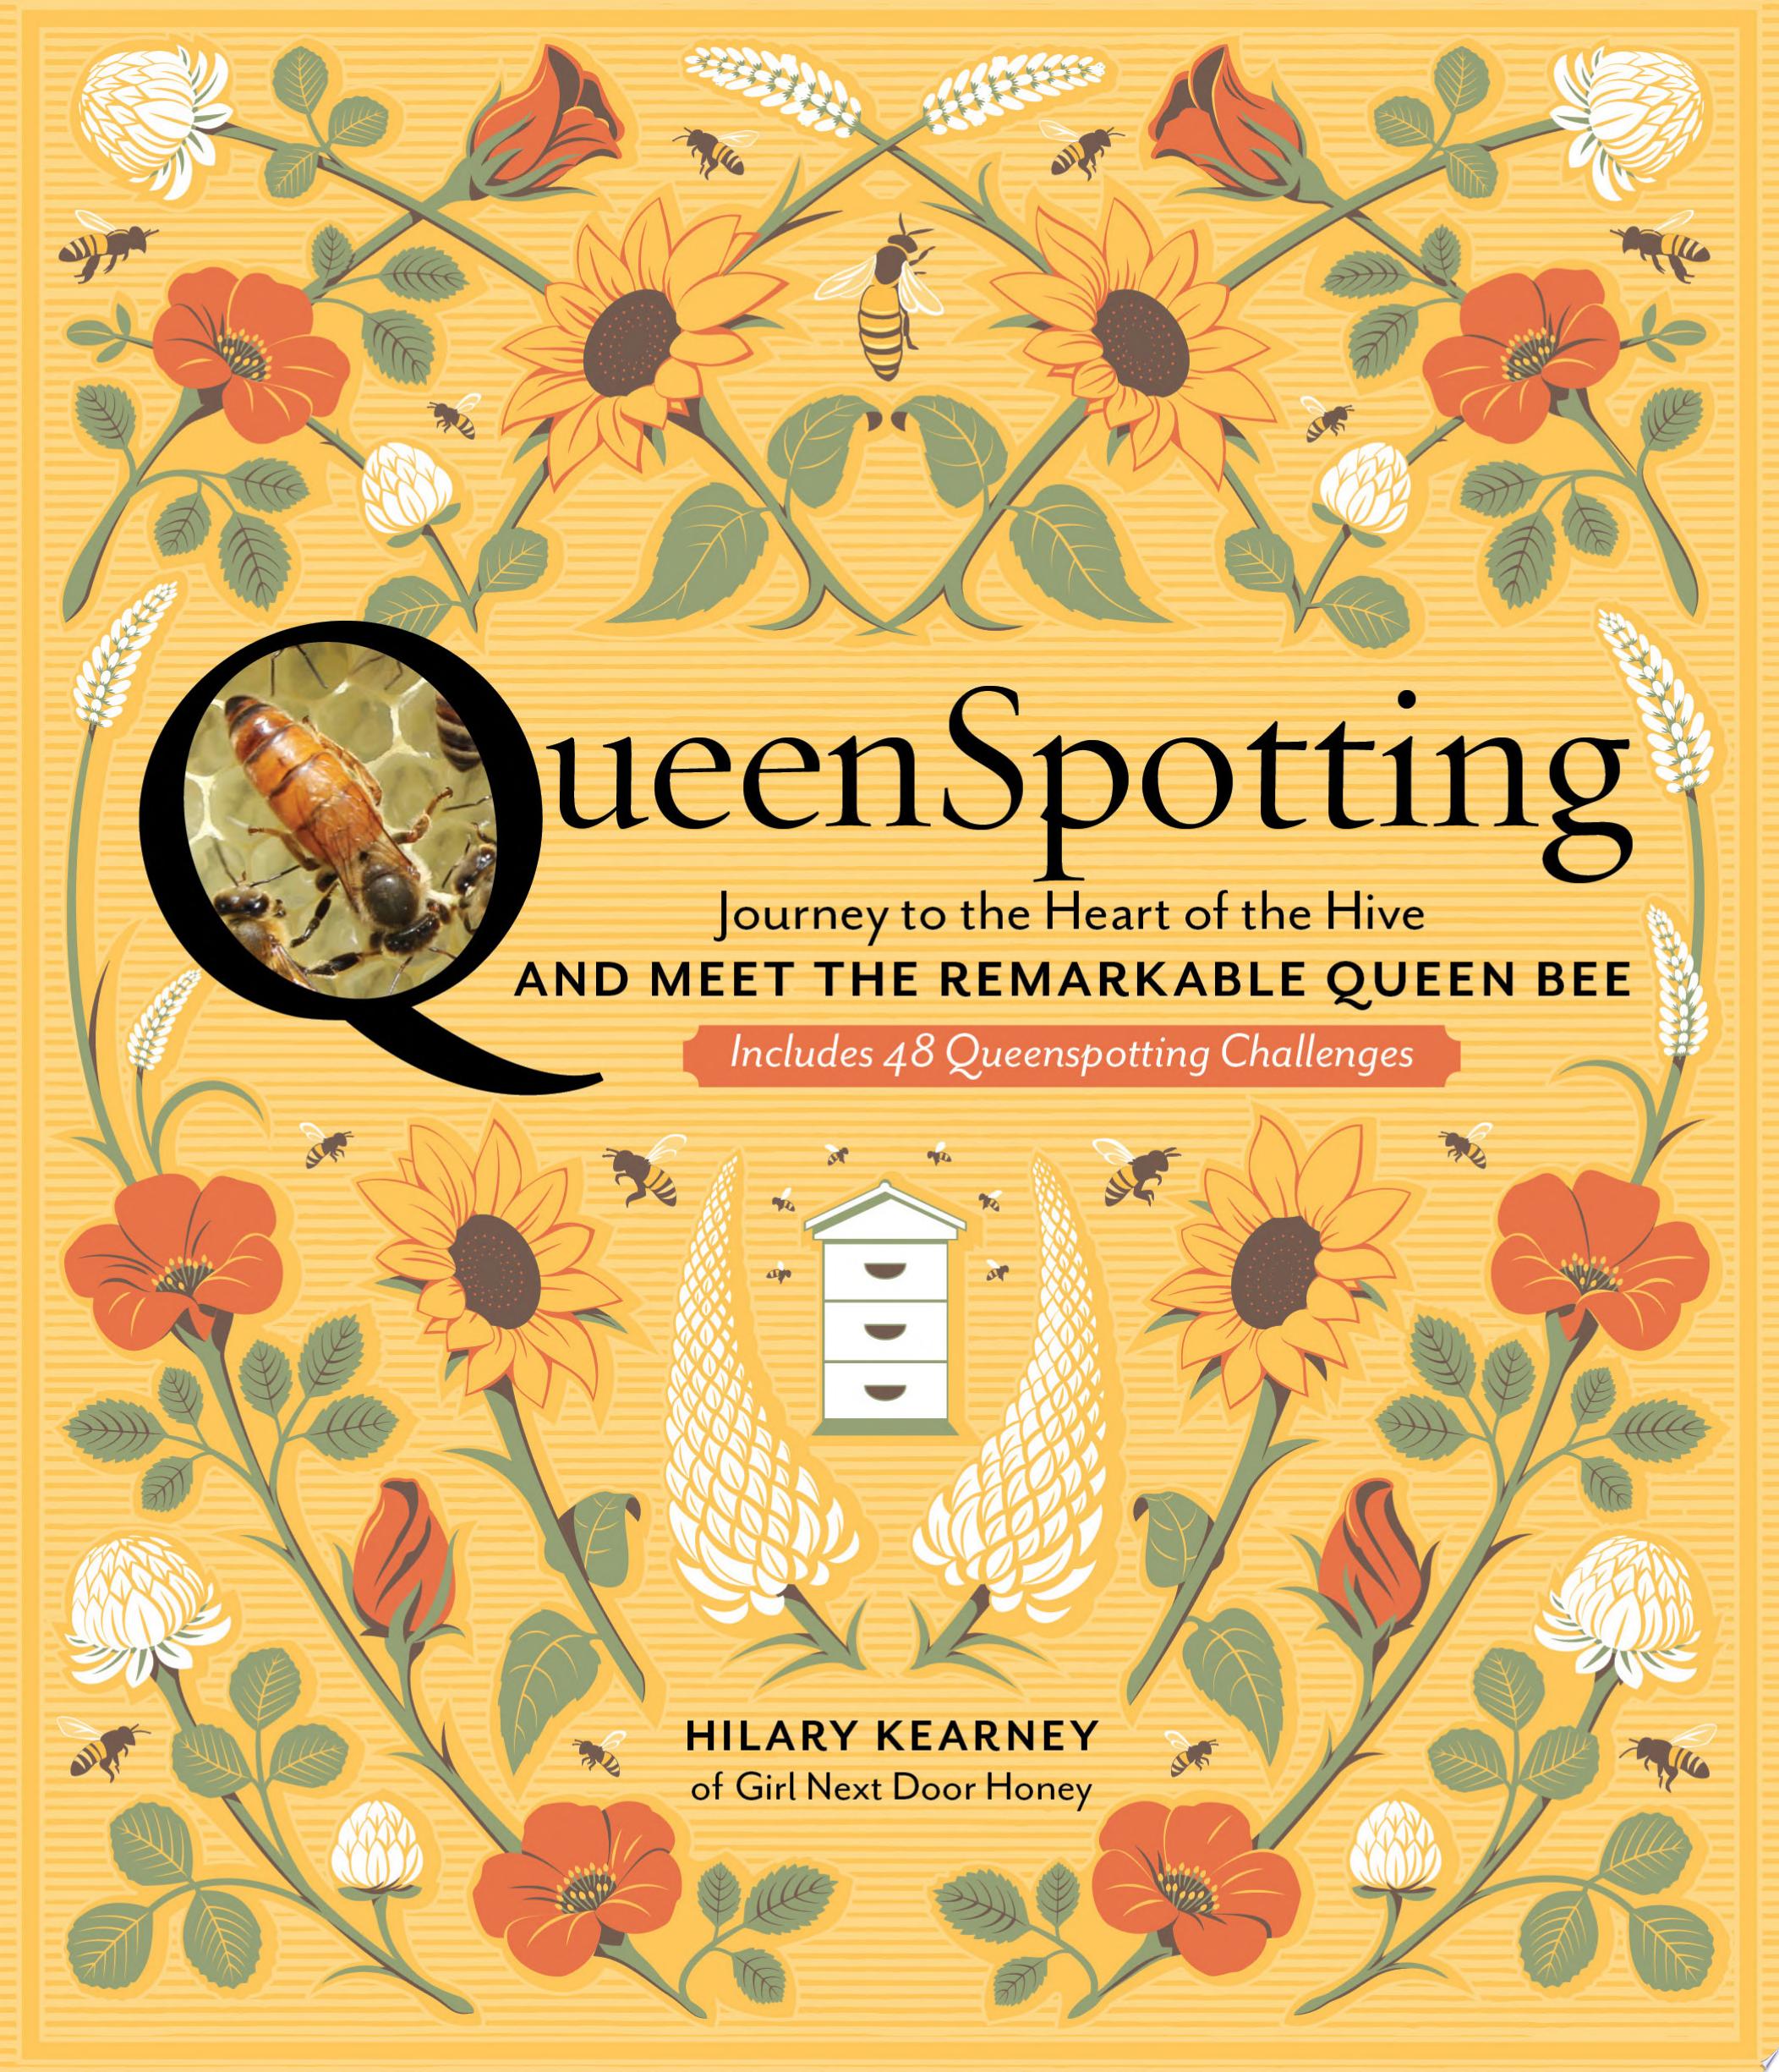 Image for "QueenSpotting"